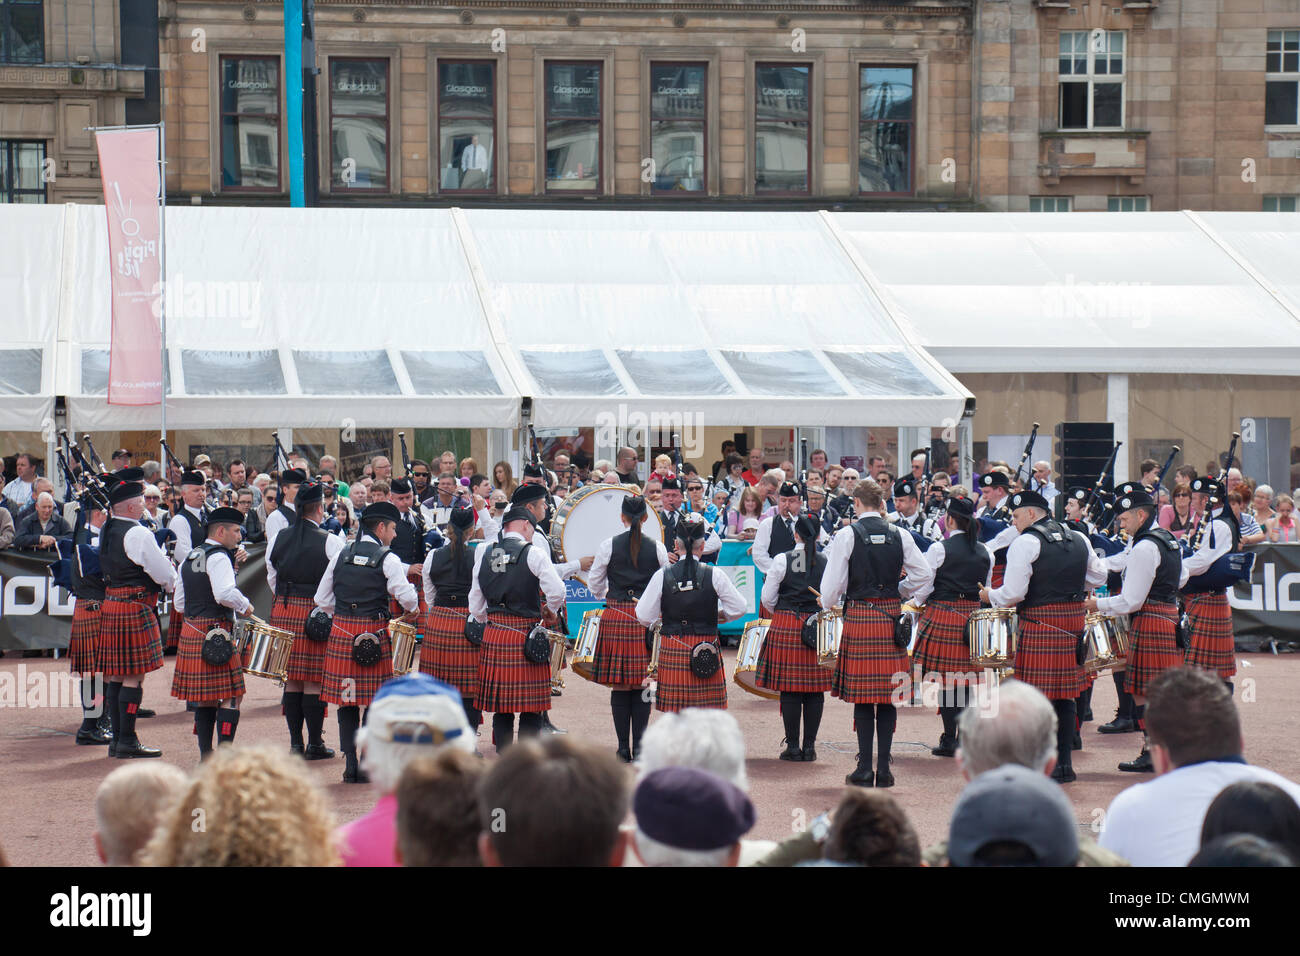 Strathclyde Police Pipe Band perform in front of a large audience in George Square, central Glasgow, as part of the Piping Live!, Glasgow's International Piping Festival, on 7th August, 2012. Stock Photo